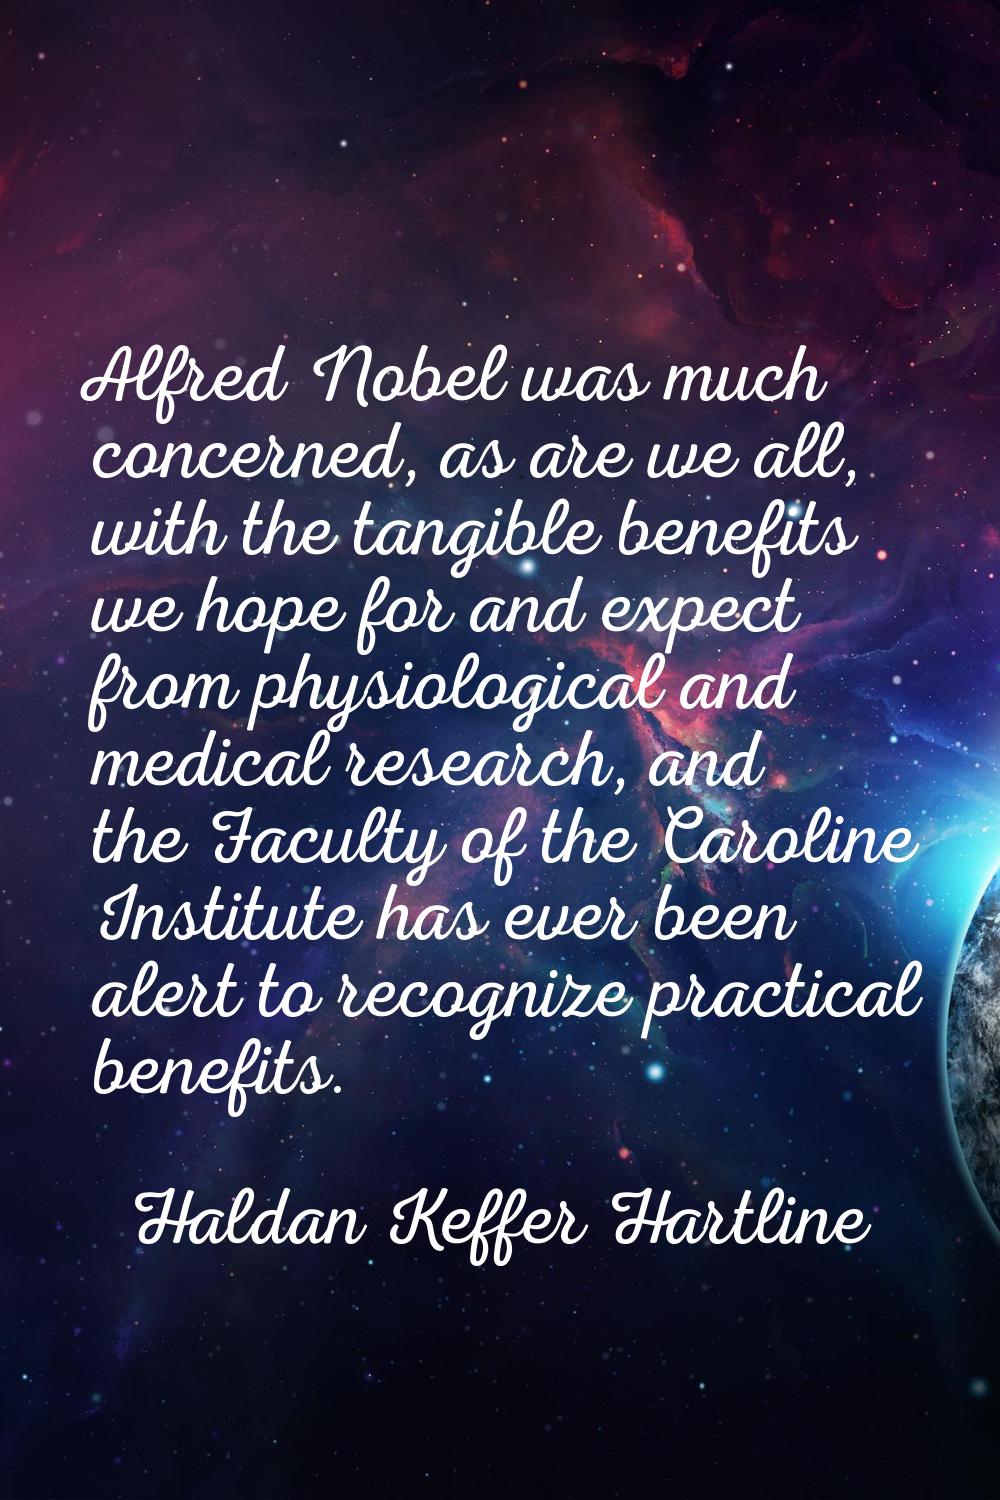 Alfred Nobel was much concerned, as are we all, with the tangible benefits we hope for and expect f